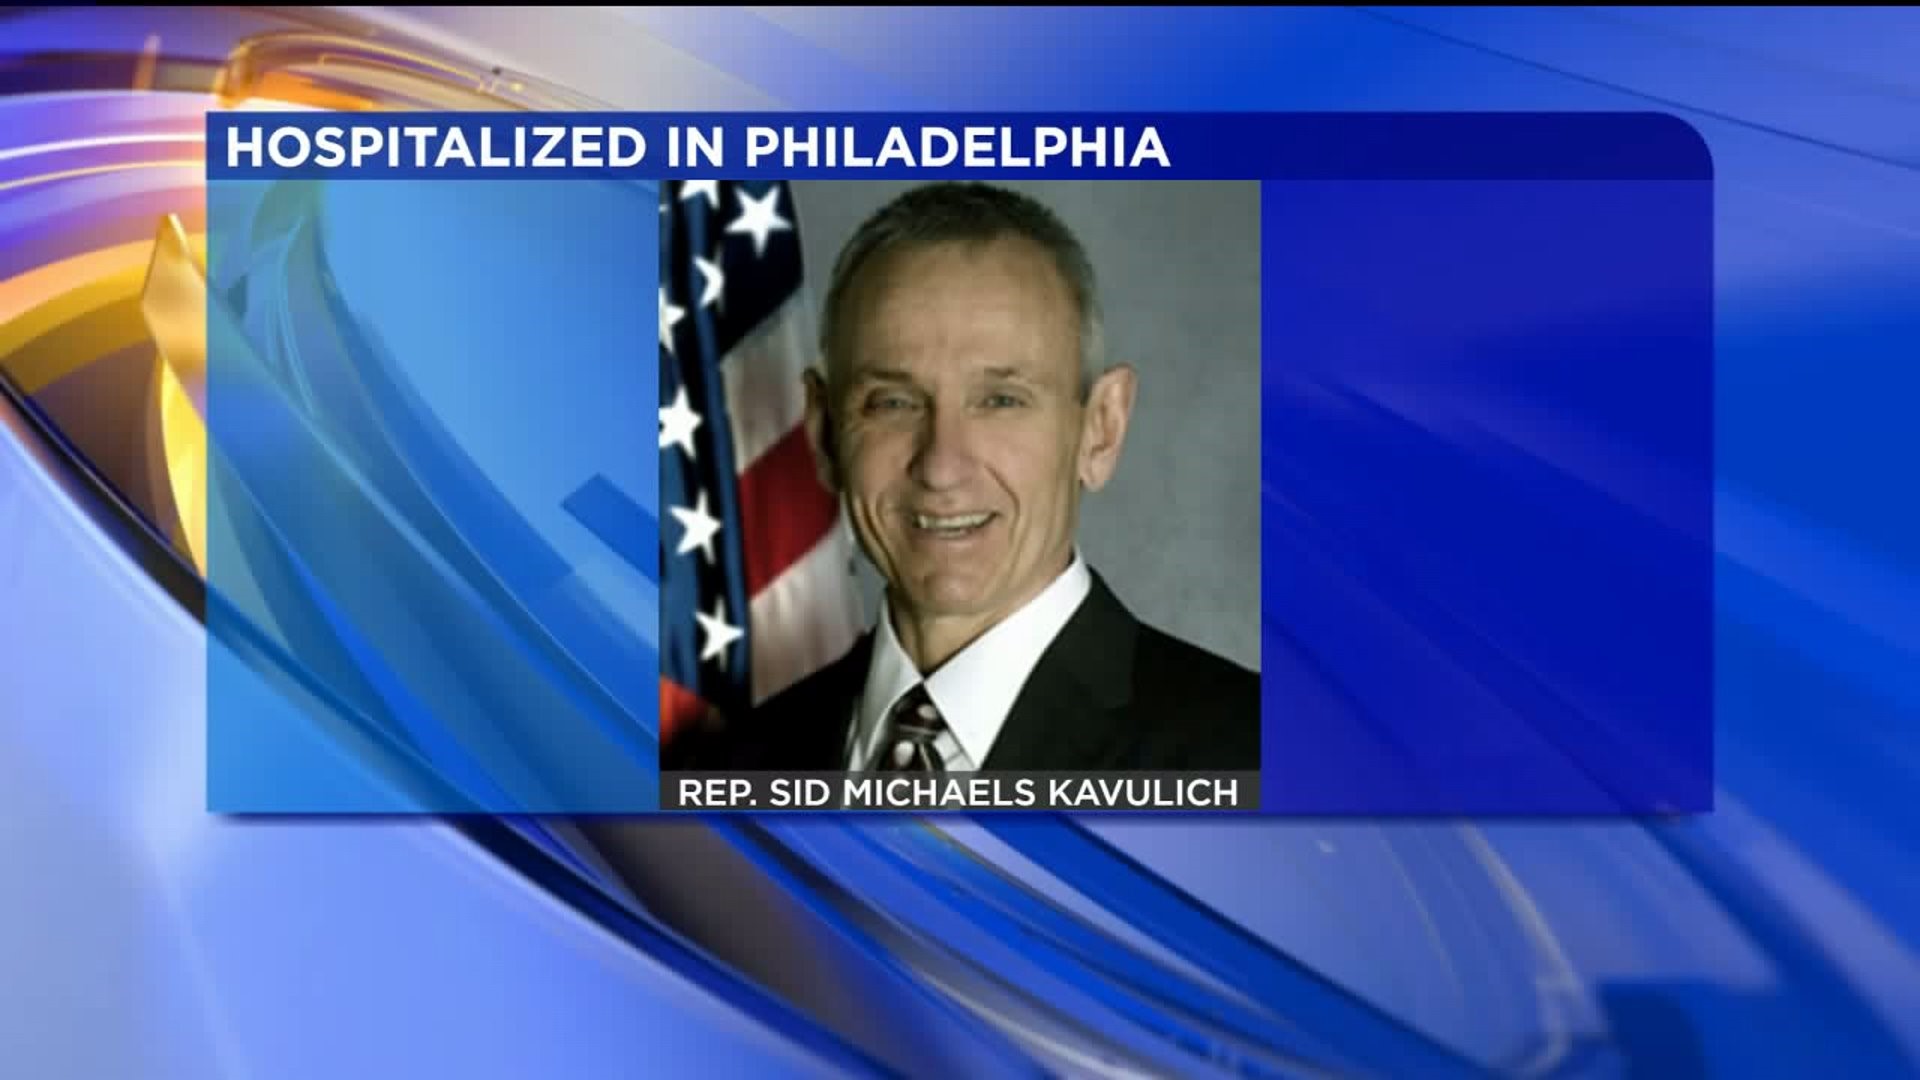 Rep. Kavulich Hospitalized after Heart Surgery